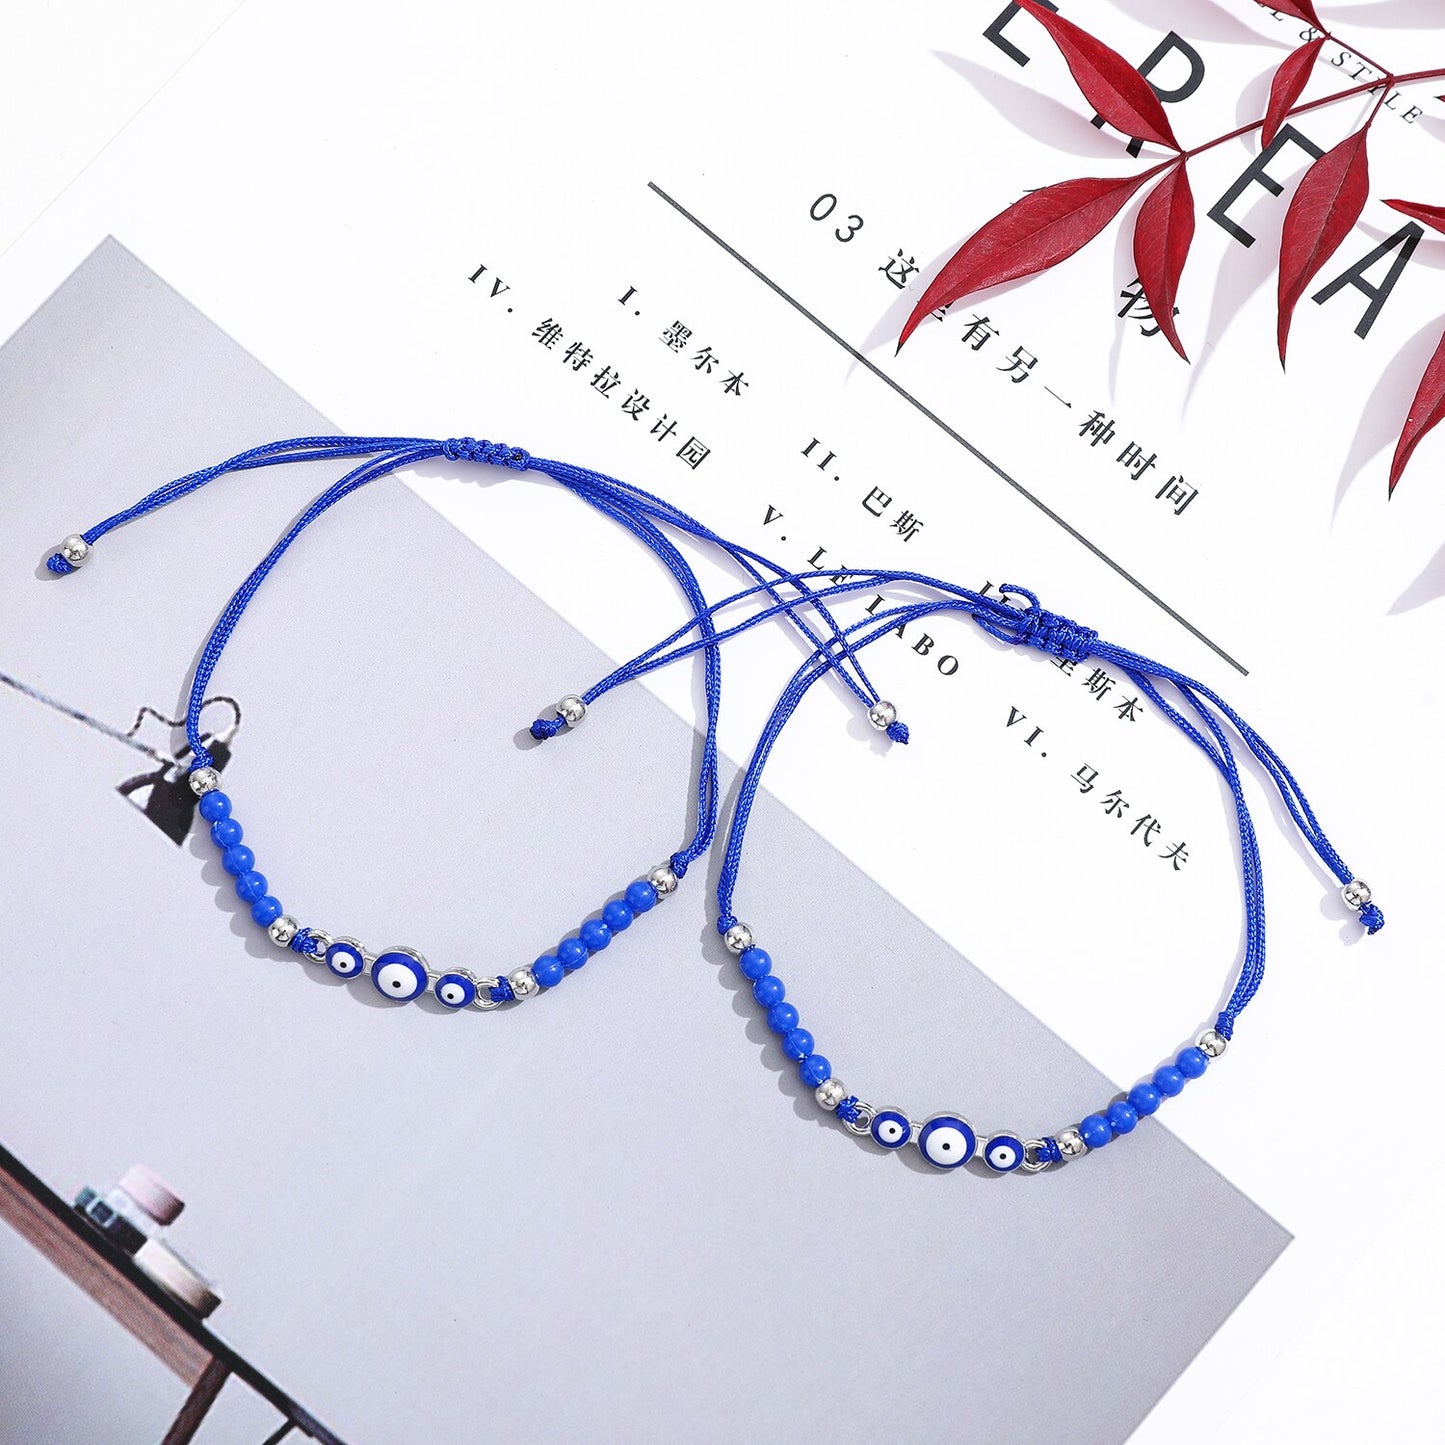 12 Pieces Evil Eye Charms Bracelet for Women Men Adjustable Hand Braided Rope Anklet Surf Jewelry Wholesale